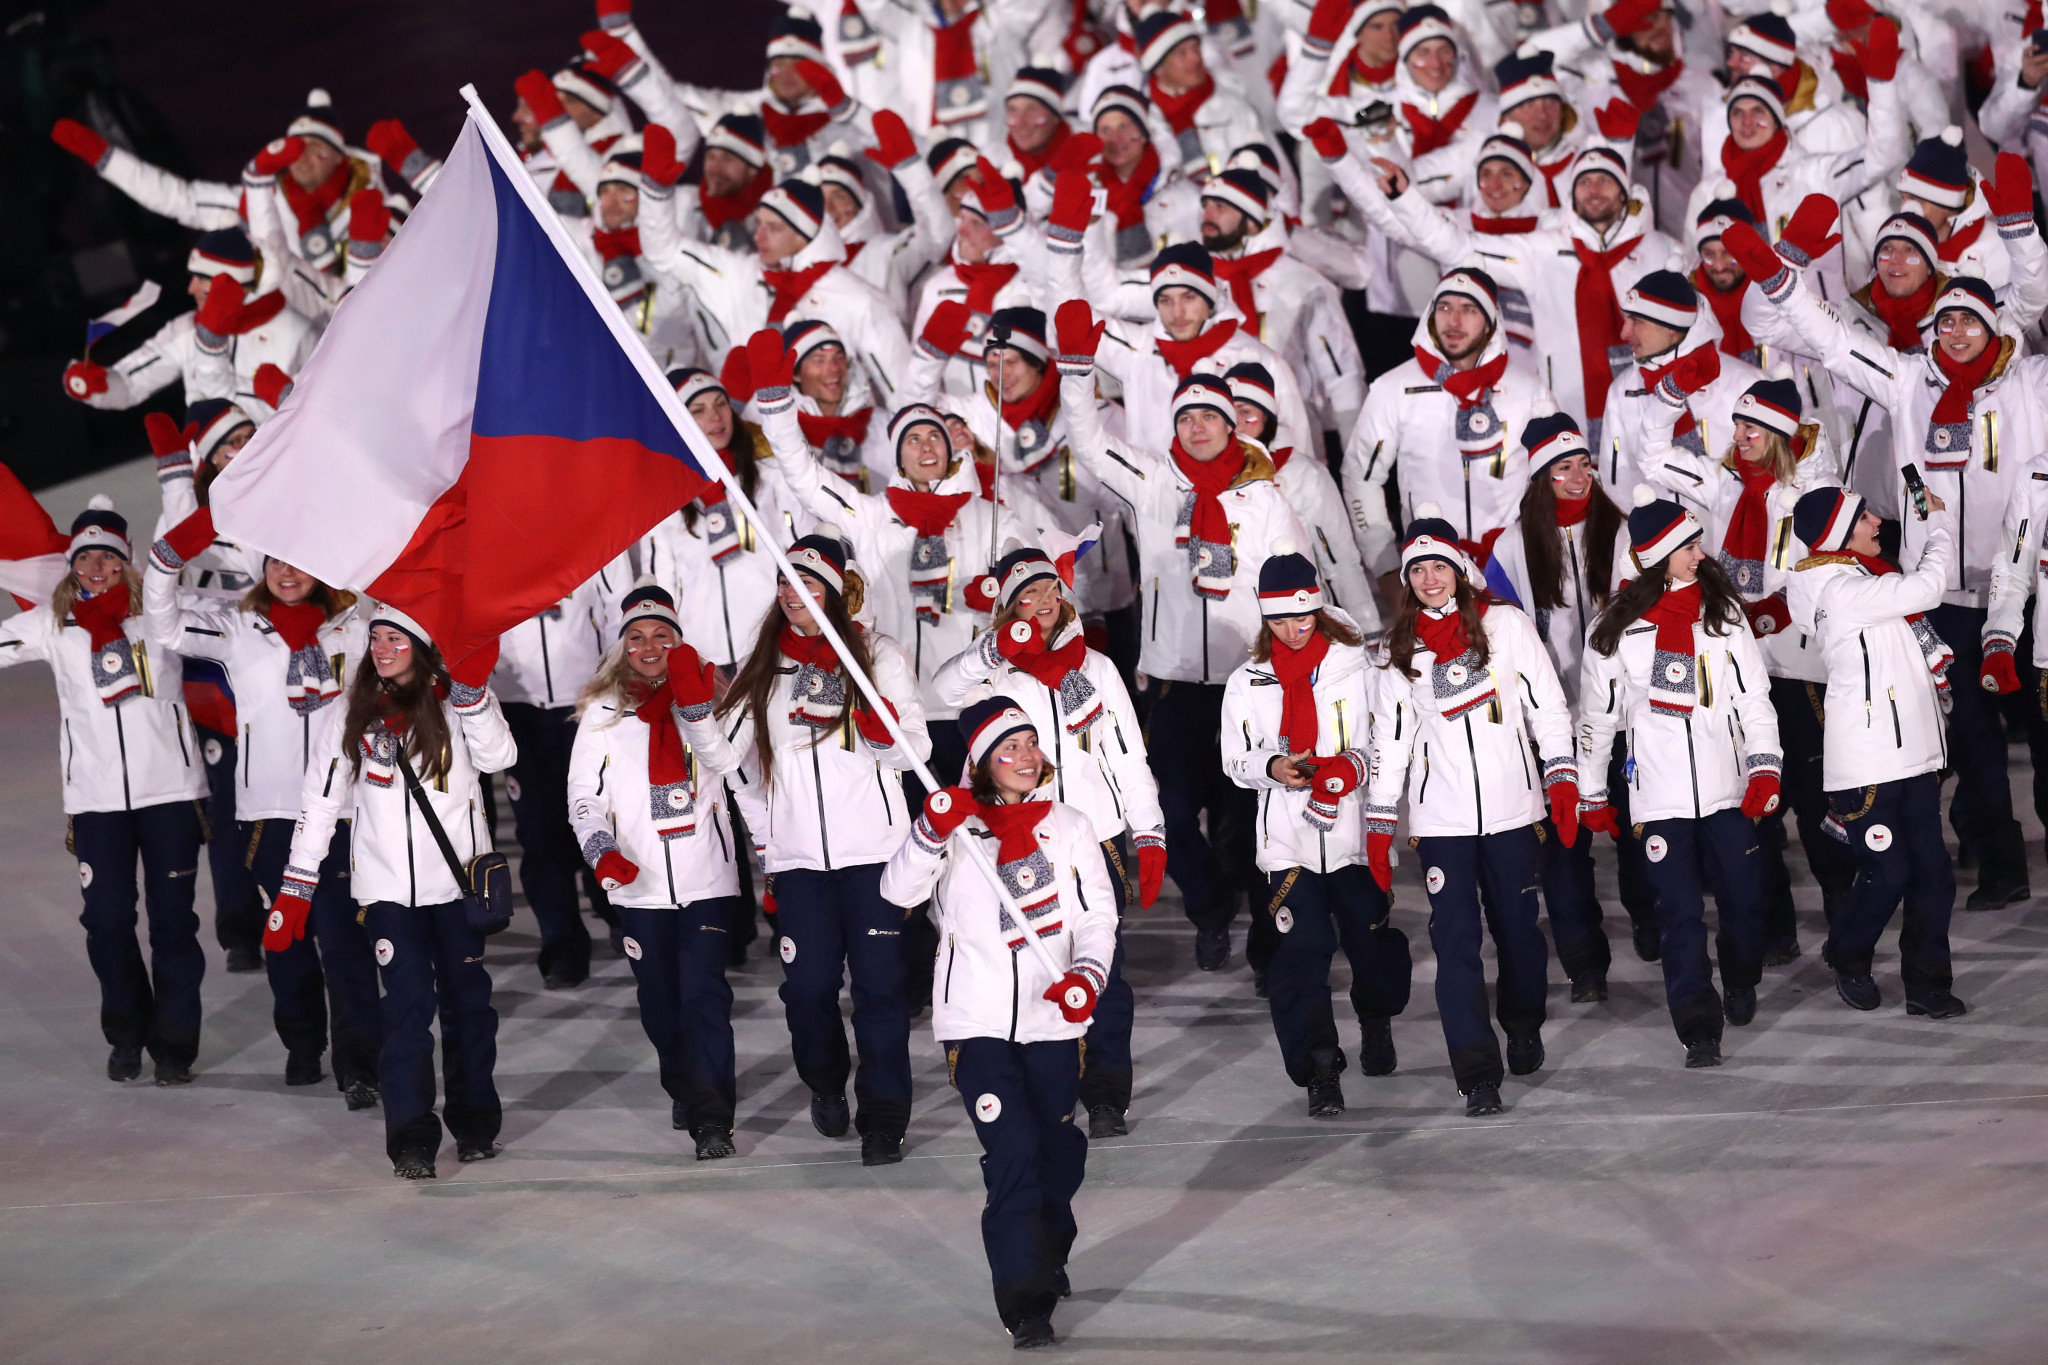 The Czech Olympic Committee Executive Committee wants the country to be known as Czechia in international sport ©Getty Images